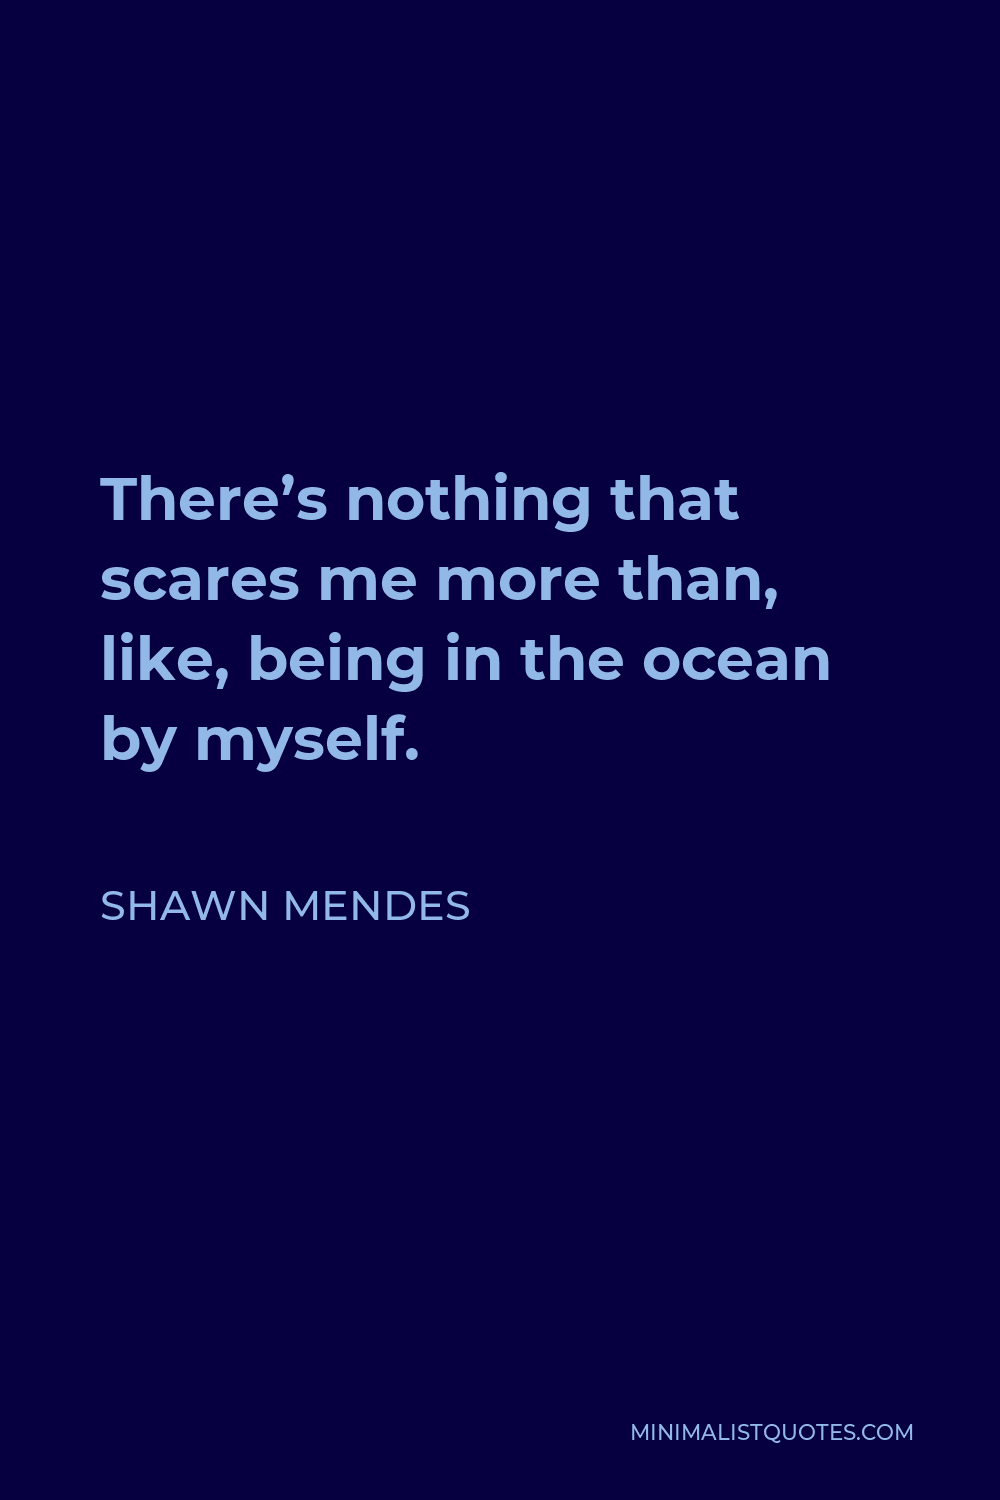 Shawn Mendes Quote - There’s nothing that scares me more than, like, being in the ocean by myself.